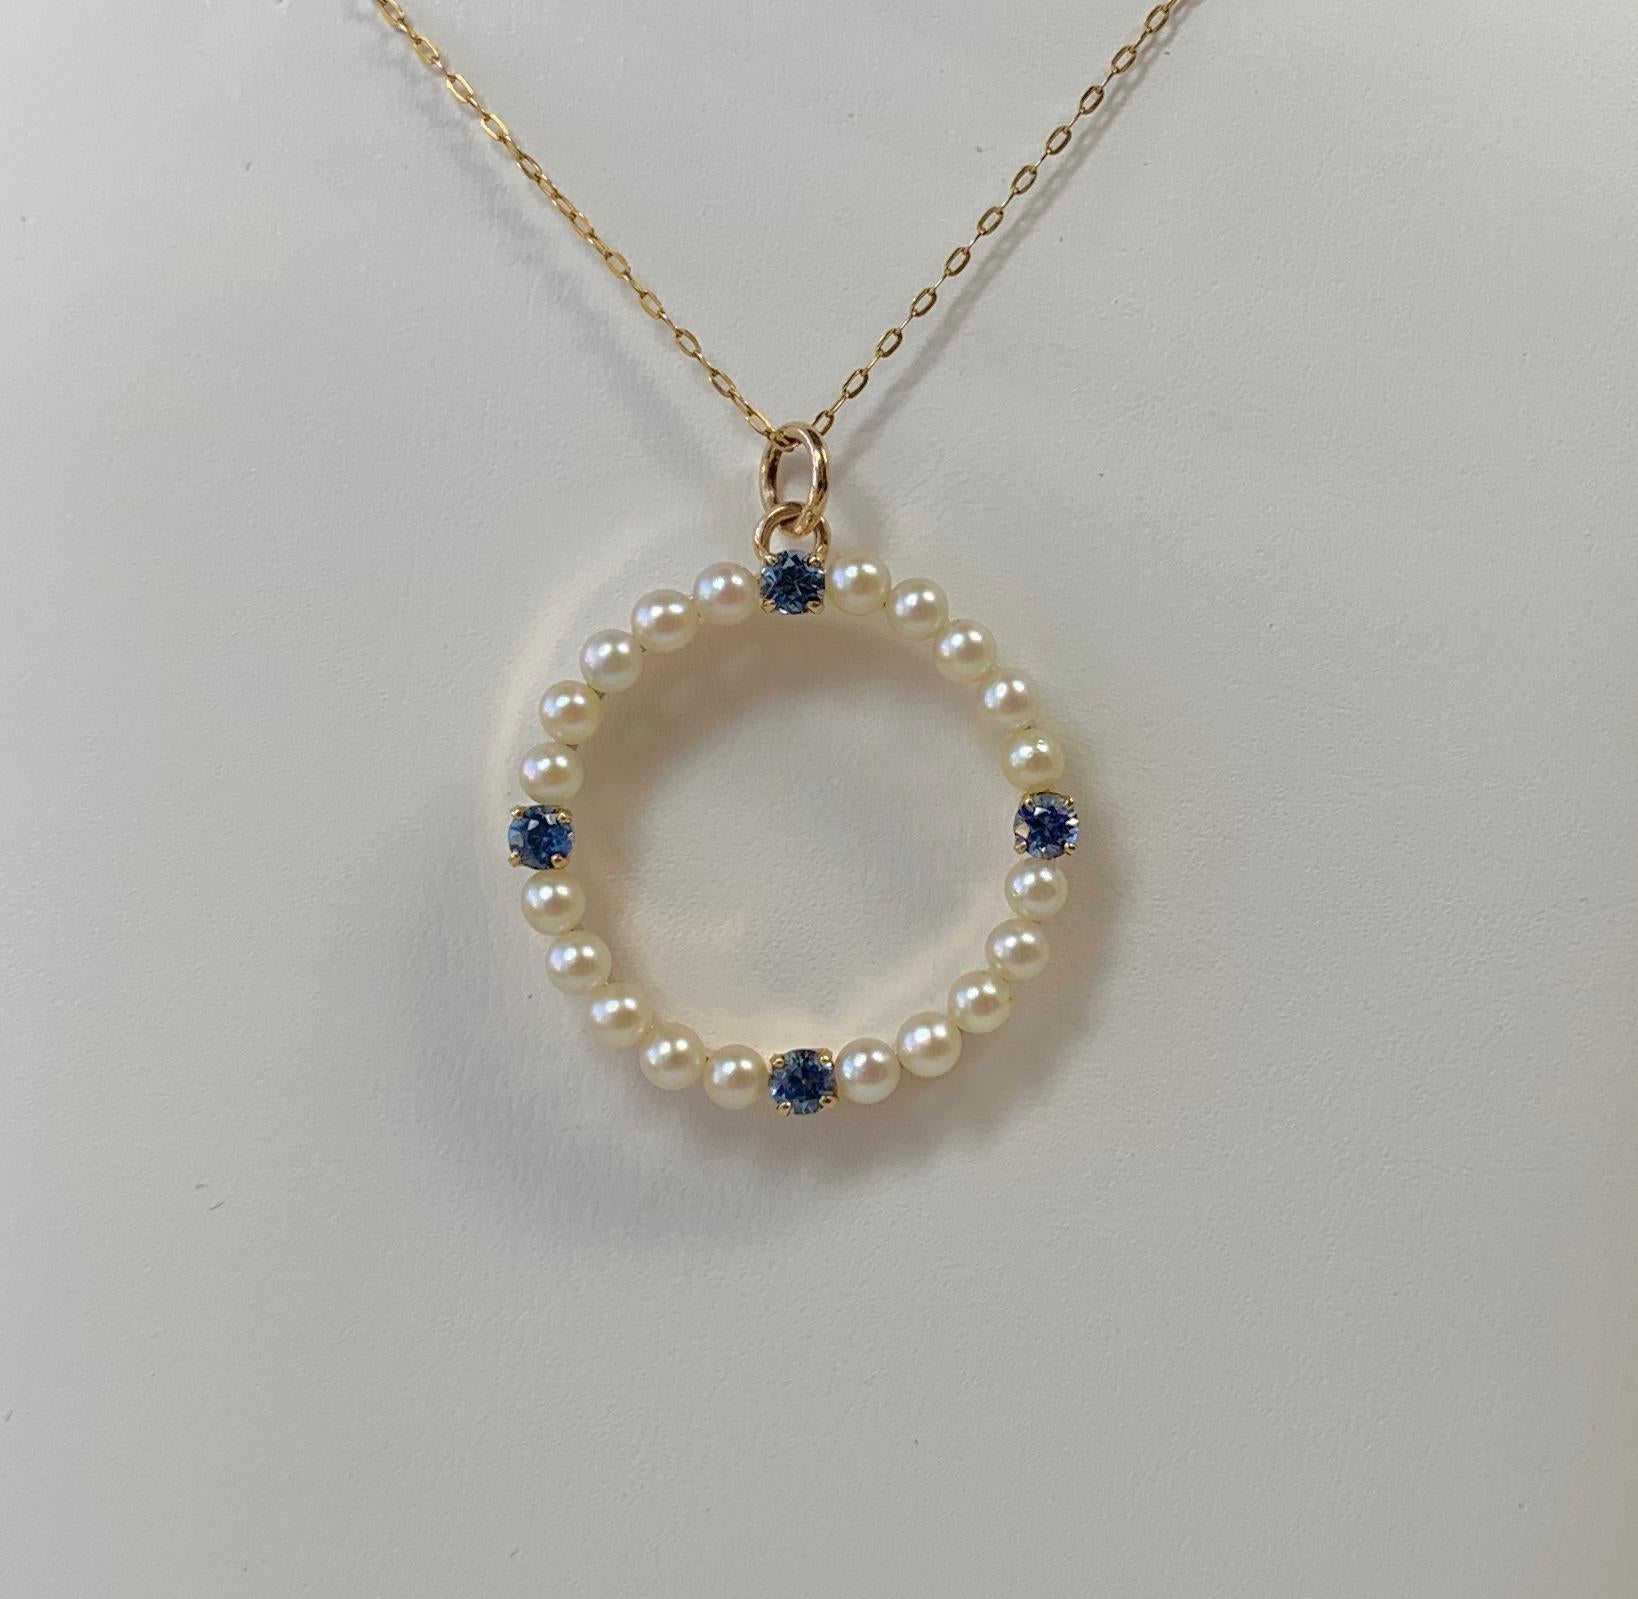 This is a beautiful and very fine antique Sapphire and Pearl Victorian - Art Deco Circle Pendant.  The pendant is set with four very fine quality blue sapphires.  These natural mined sapphires are gem quality.  They have extraordinary blue color and